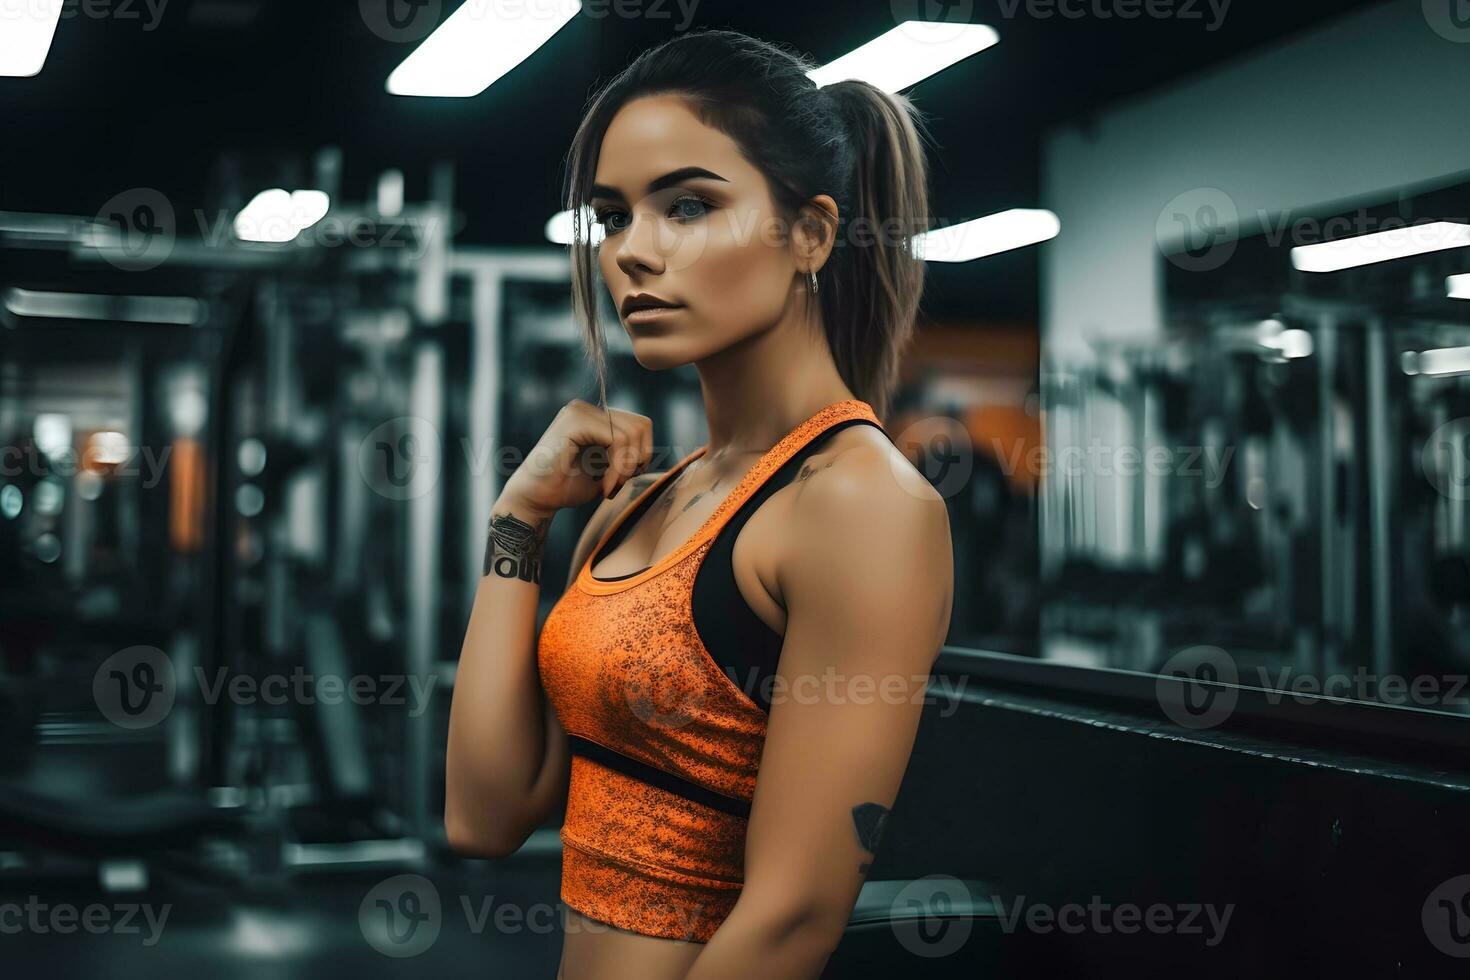 https://static.vecteezy.com/system/resources/previews/031/238/775/non_2x/beautiful-athletic-latina-woman-in-the-gym-neural-network-ai-generated-photo.jpg